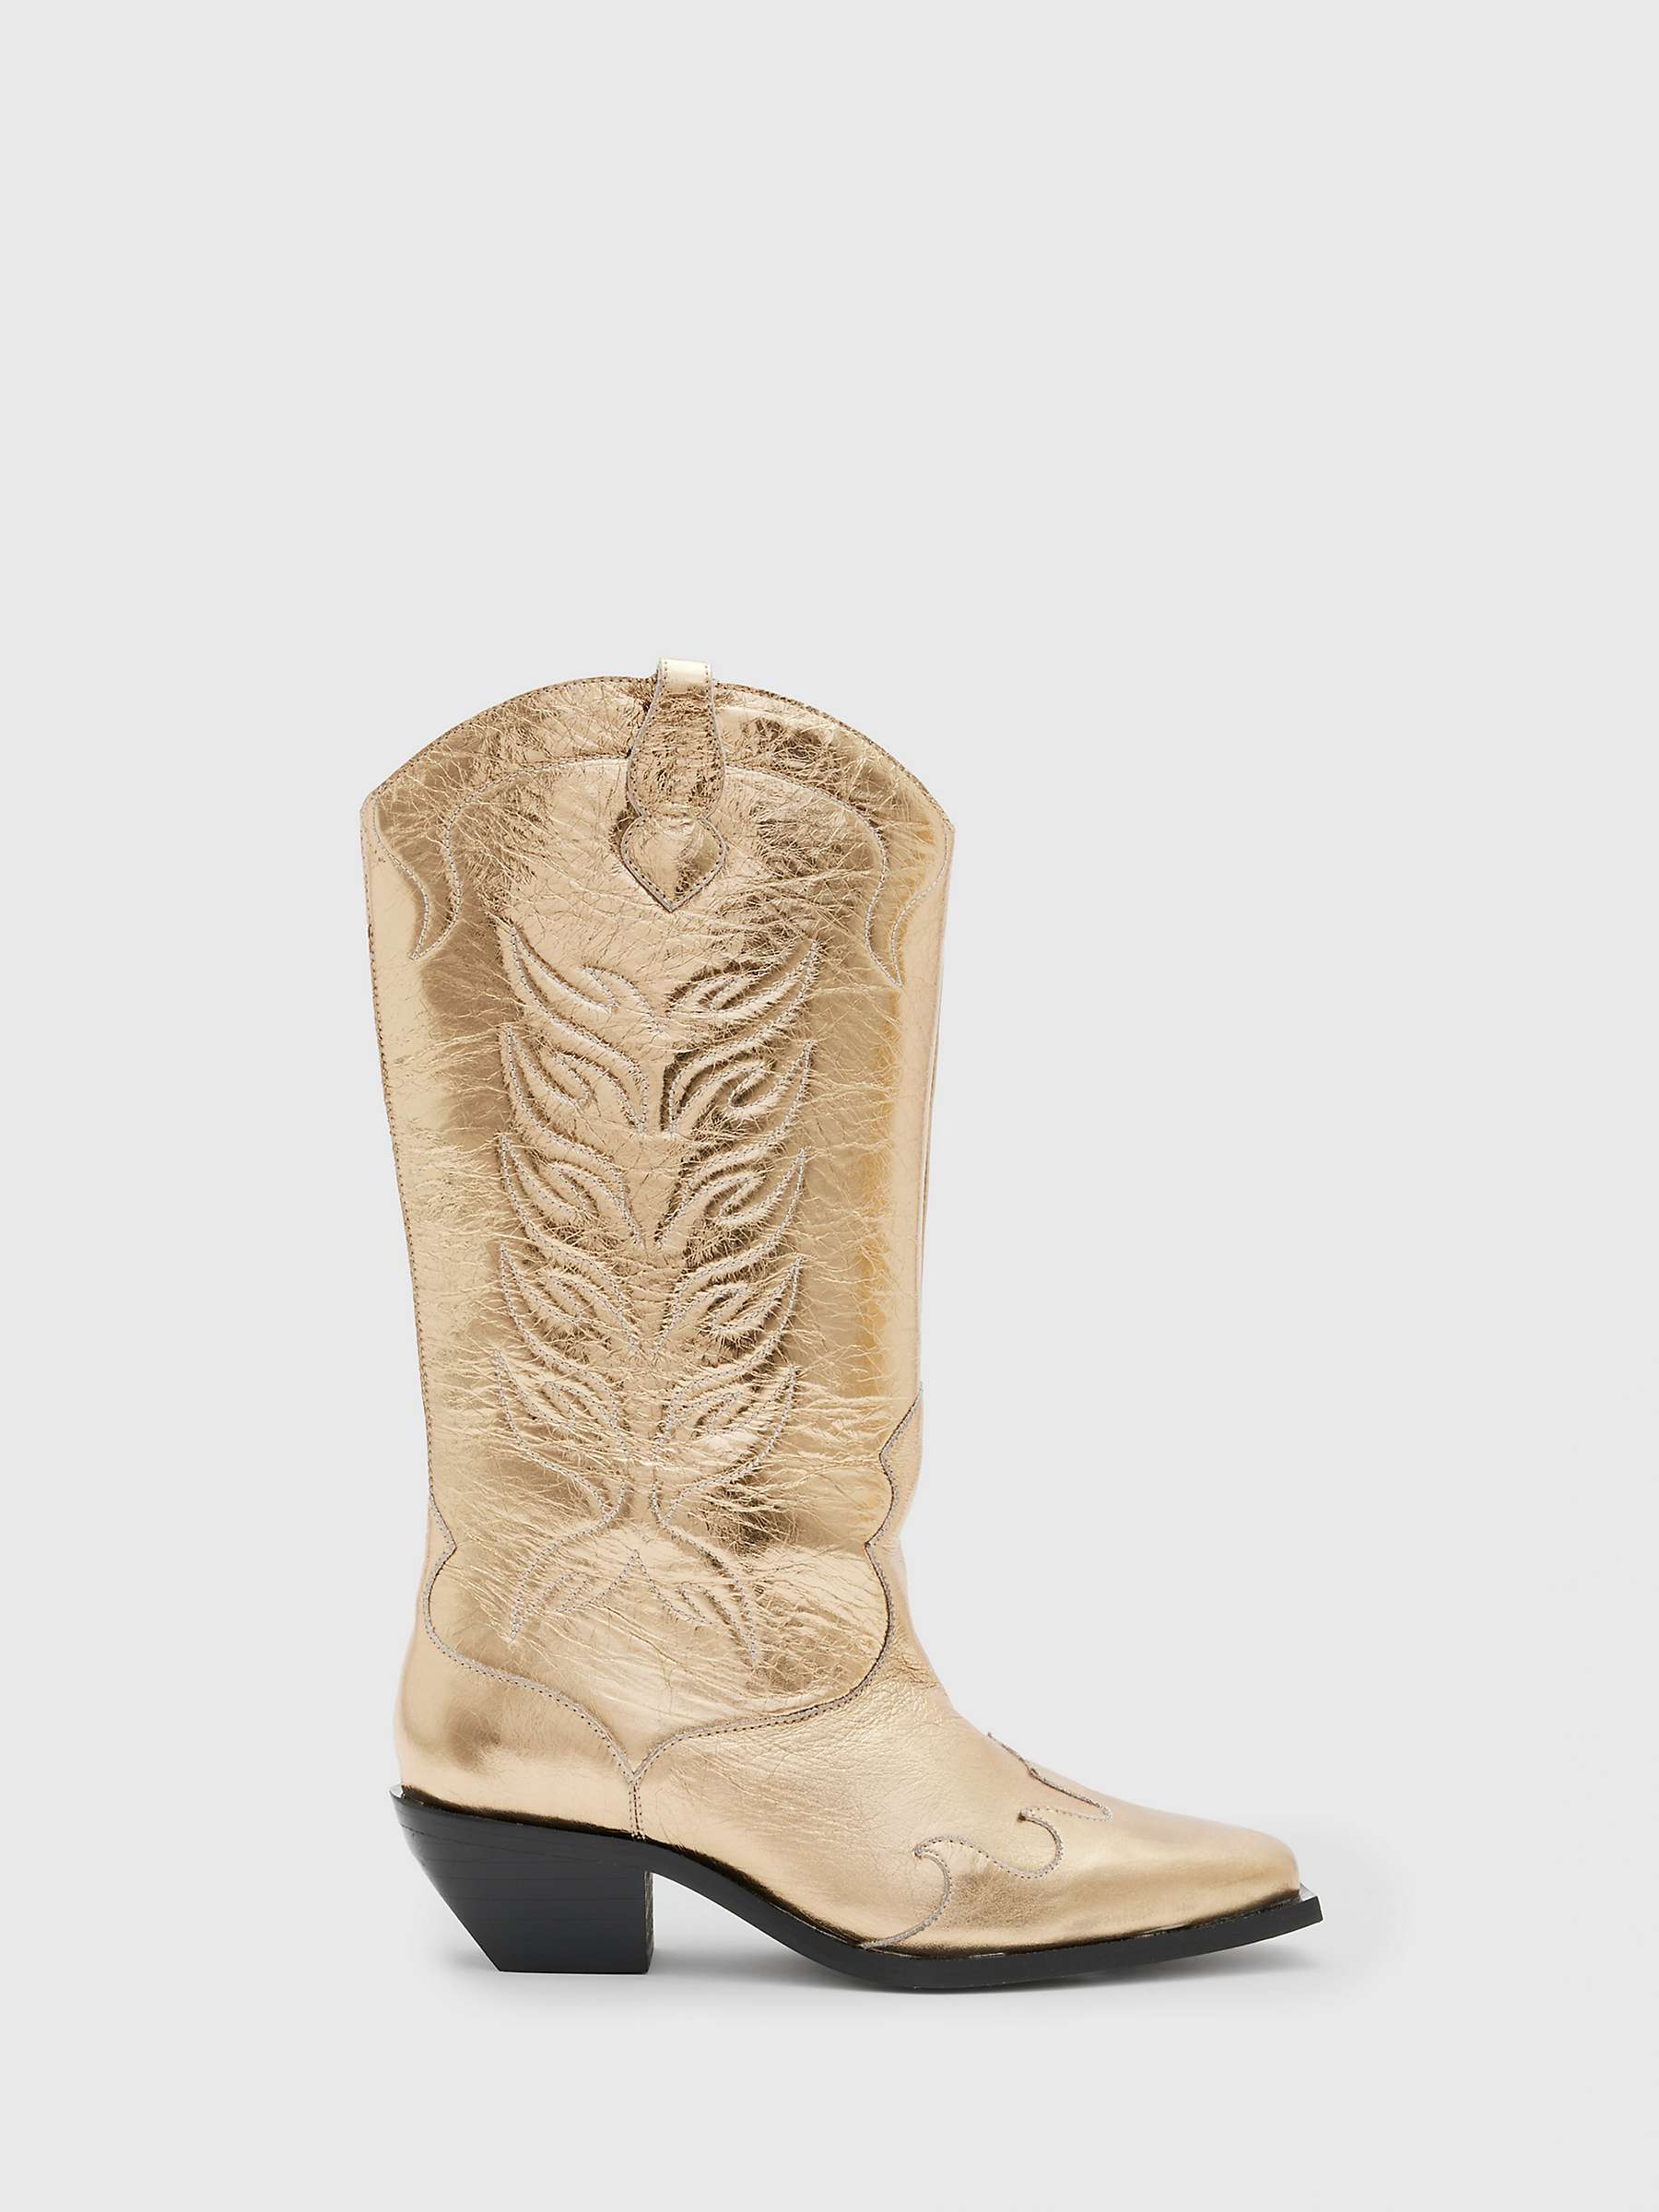 Buy AllSaints Dolly Leather Metallic Cowboy Boots, Gold Online at johnlewis.com